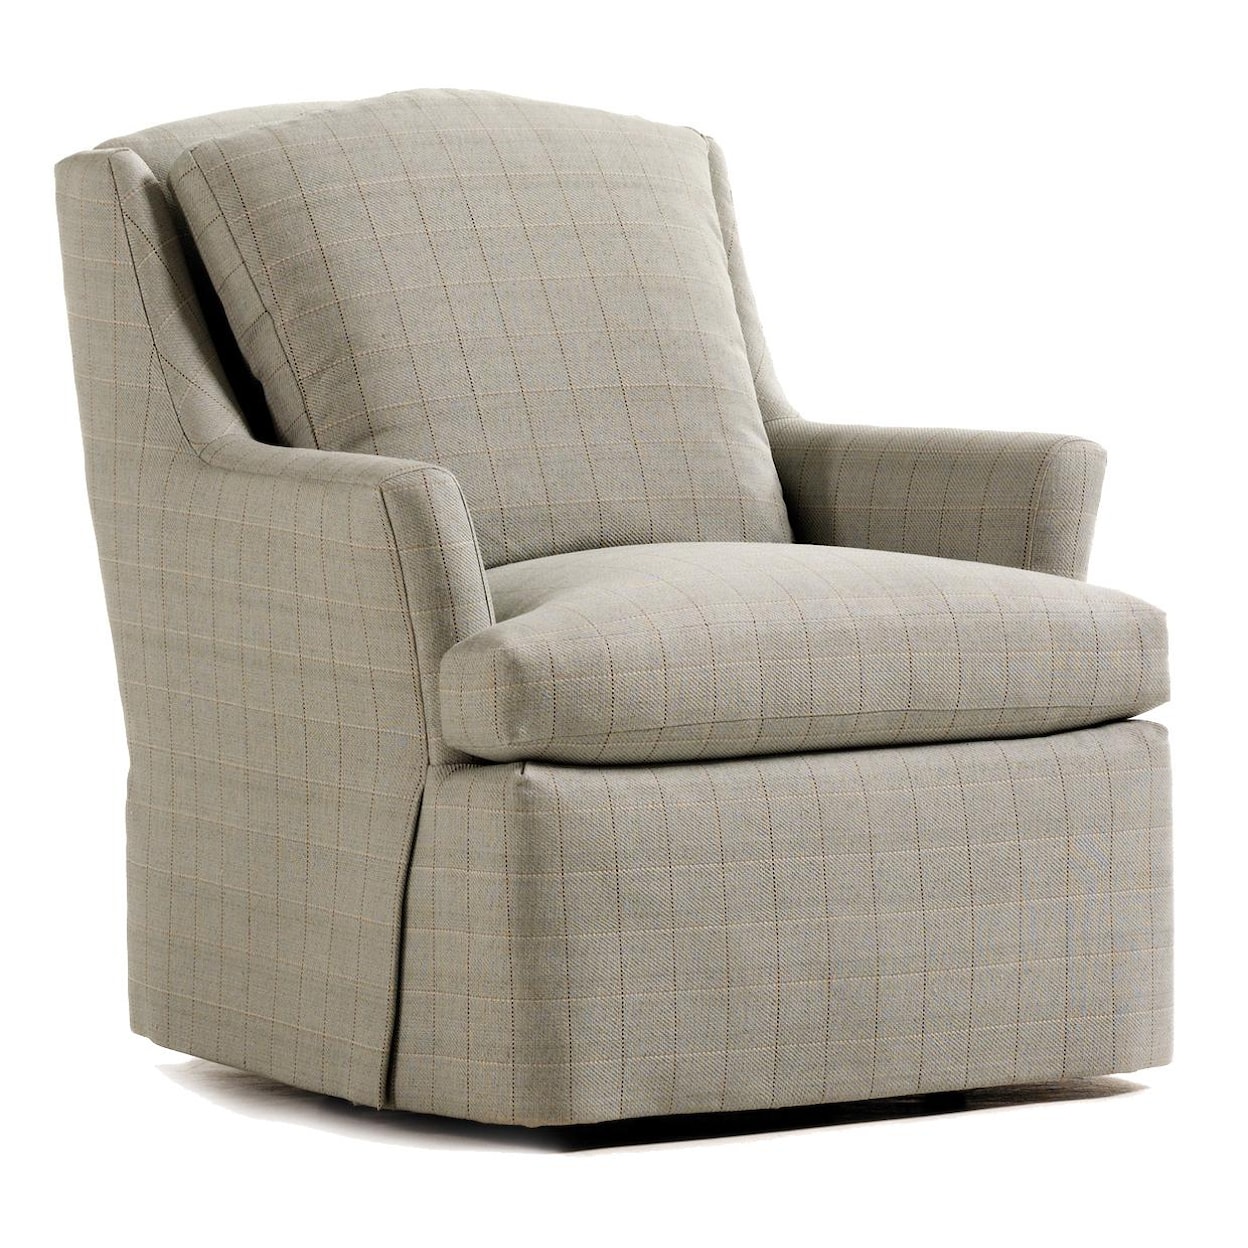 Jessica Charles Fine Upholstered Accents Cagney Swivel Rocker   